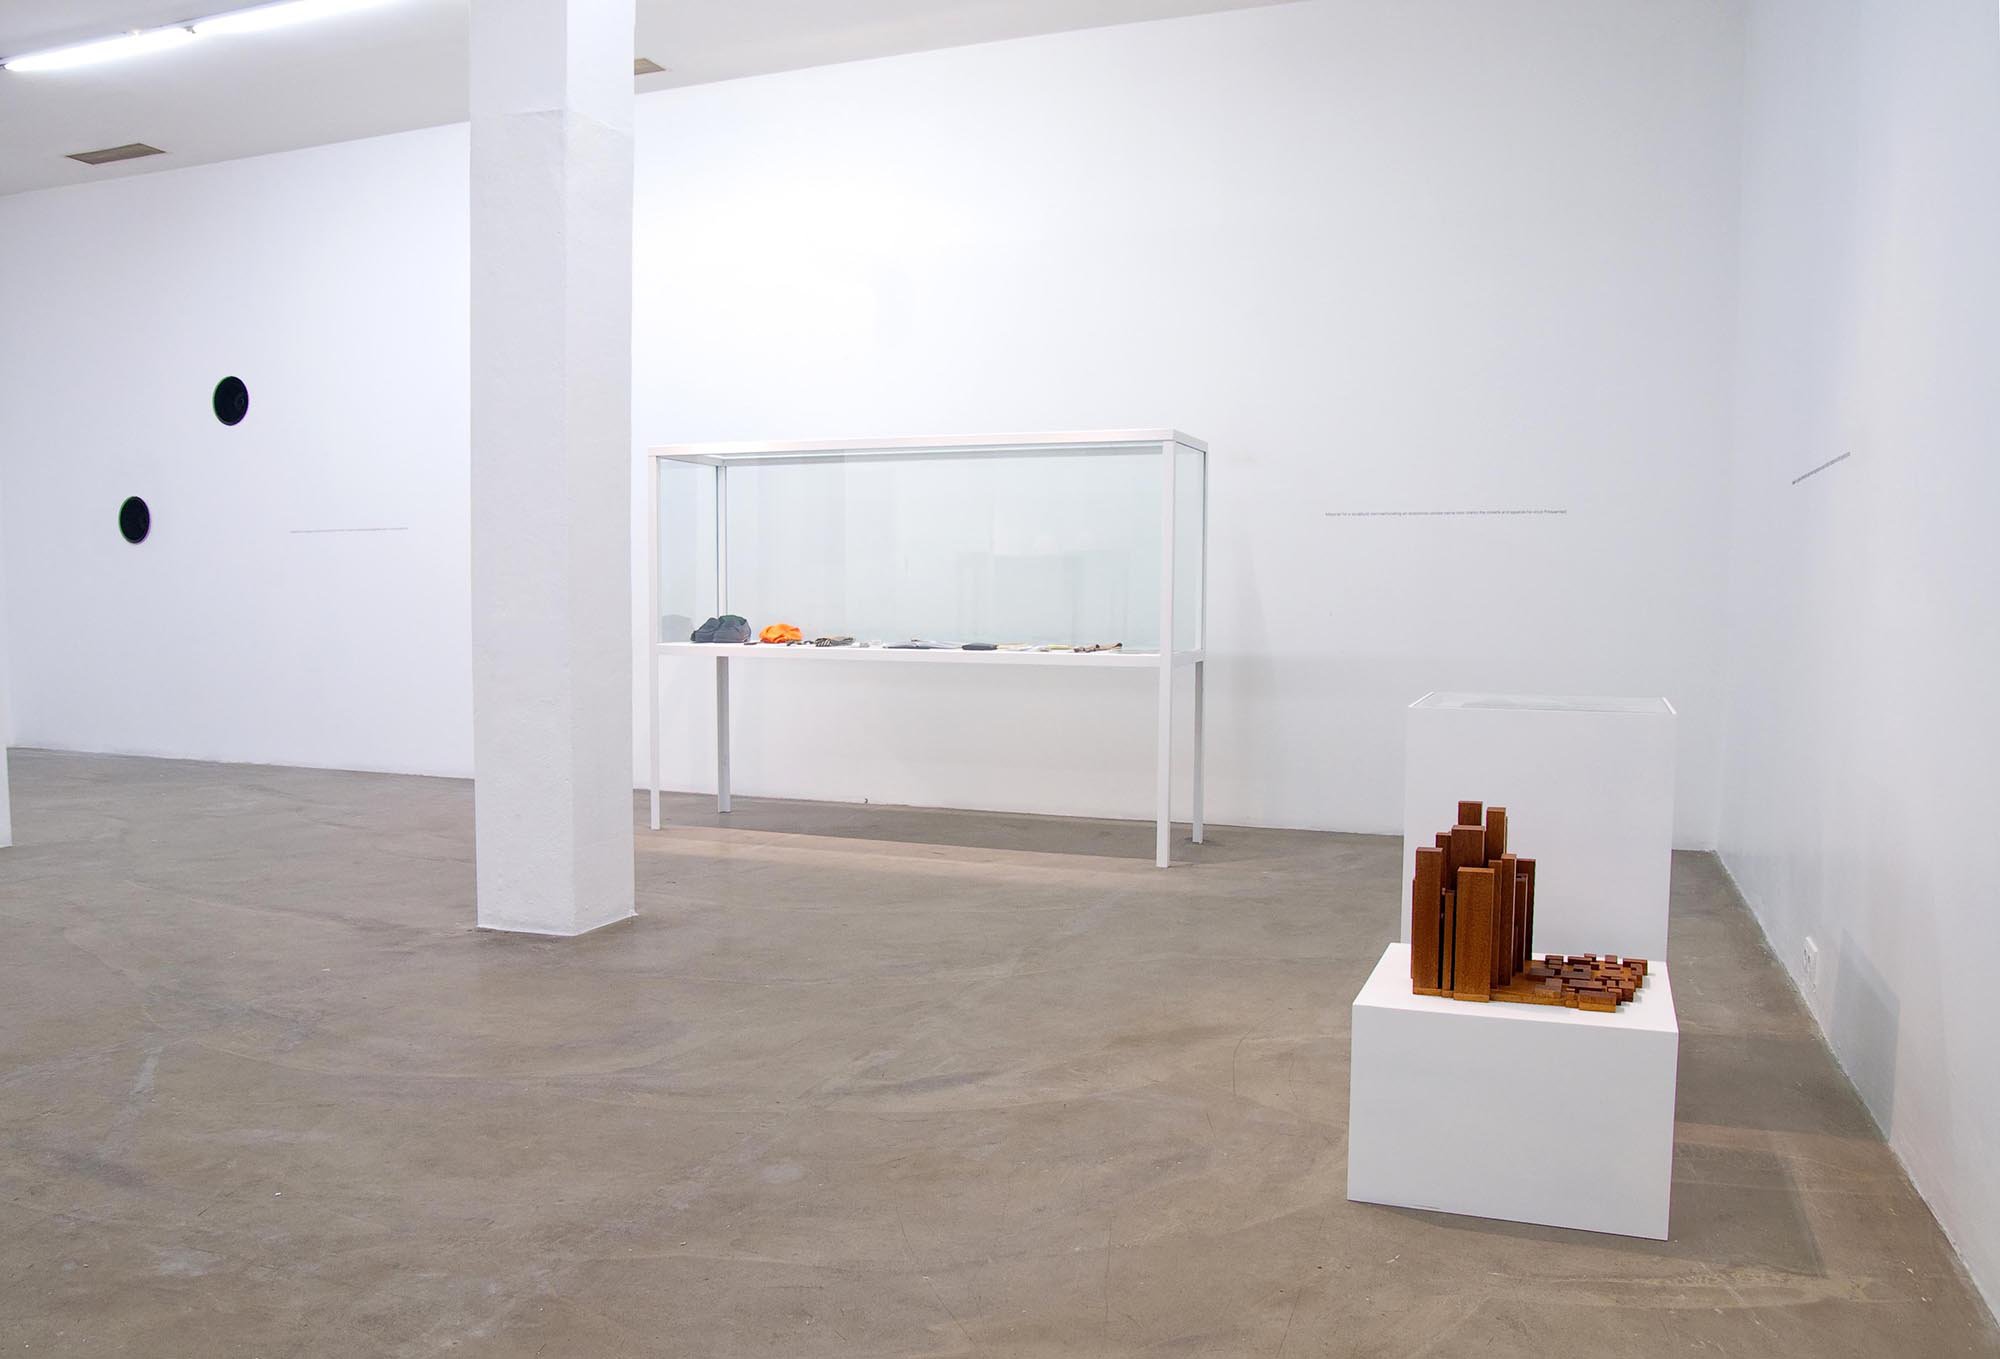 Installation view, Iman Issa, Material, Rodeo, Istanbul, 2011